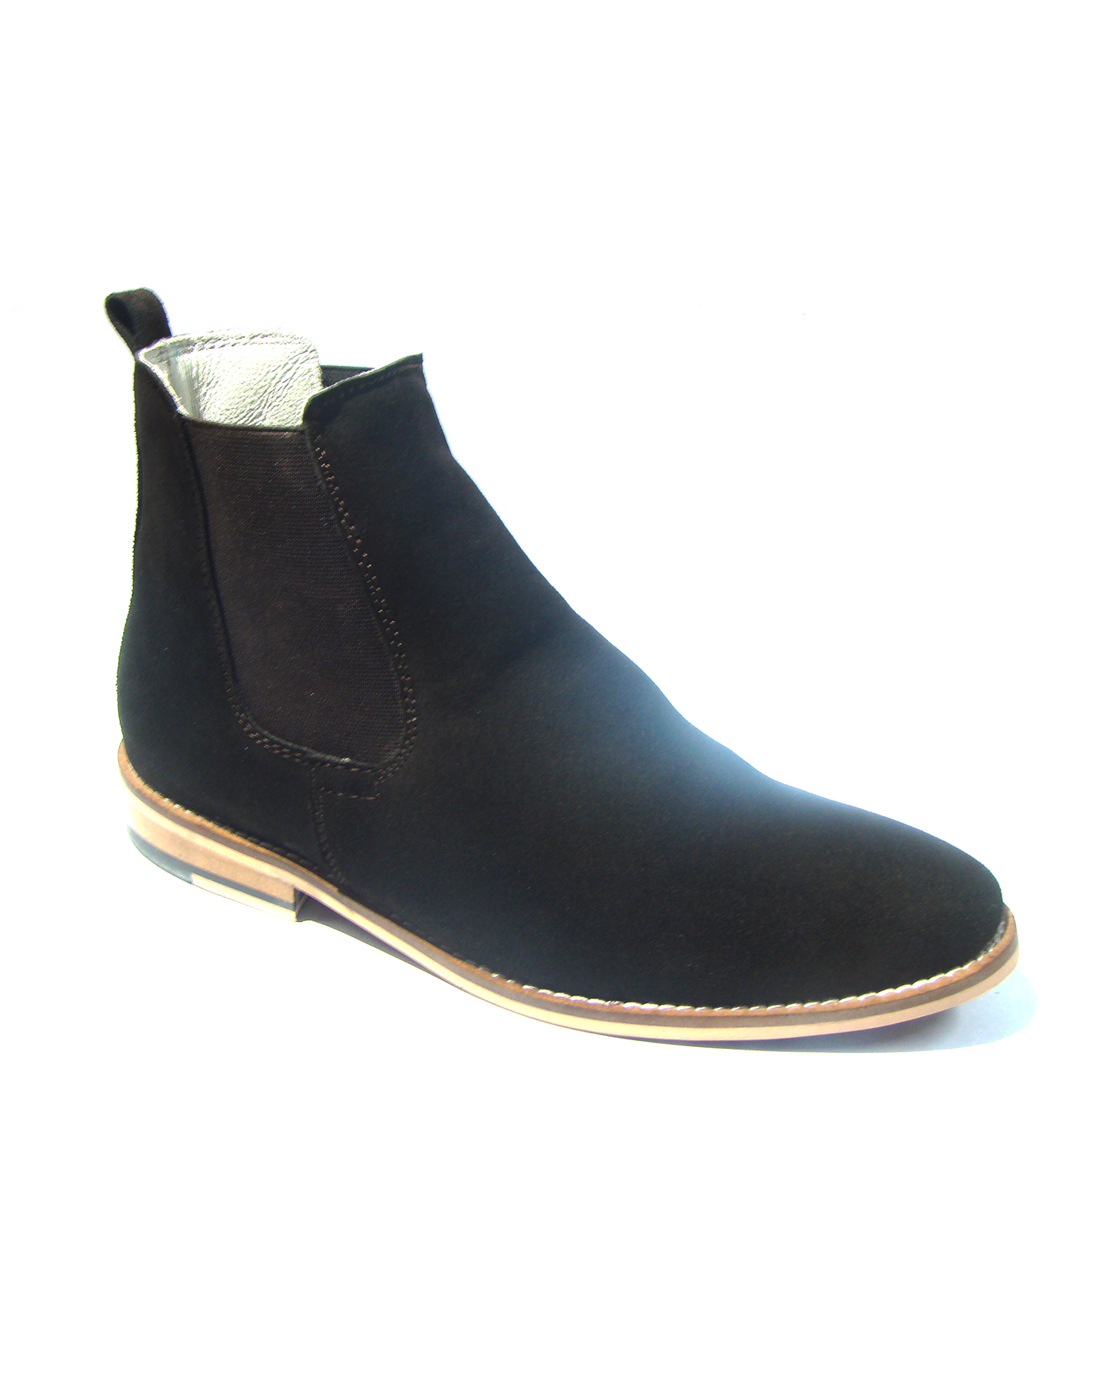 Chelsea Boots - Buy 6 inches Pure Leather Chelsea Boots online at ...